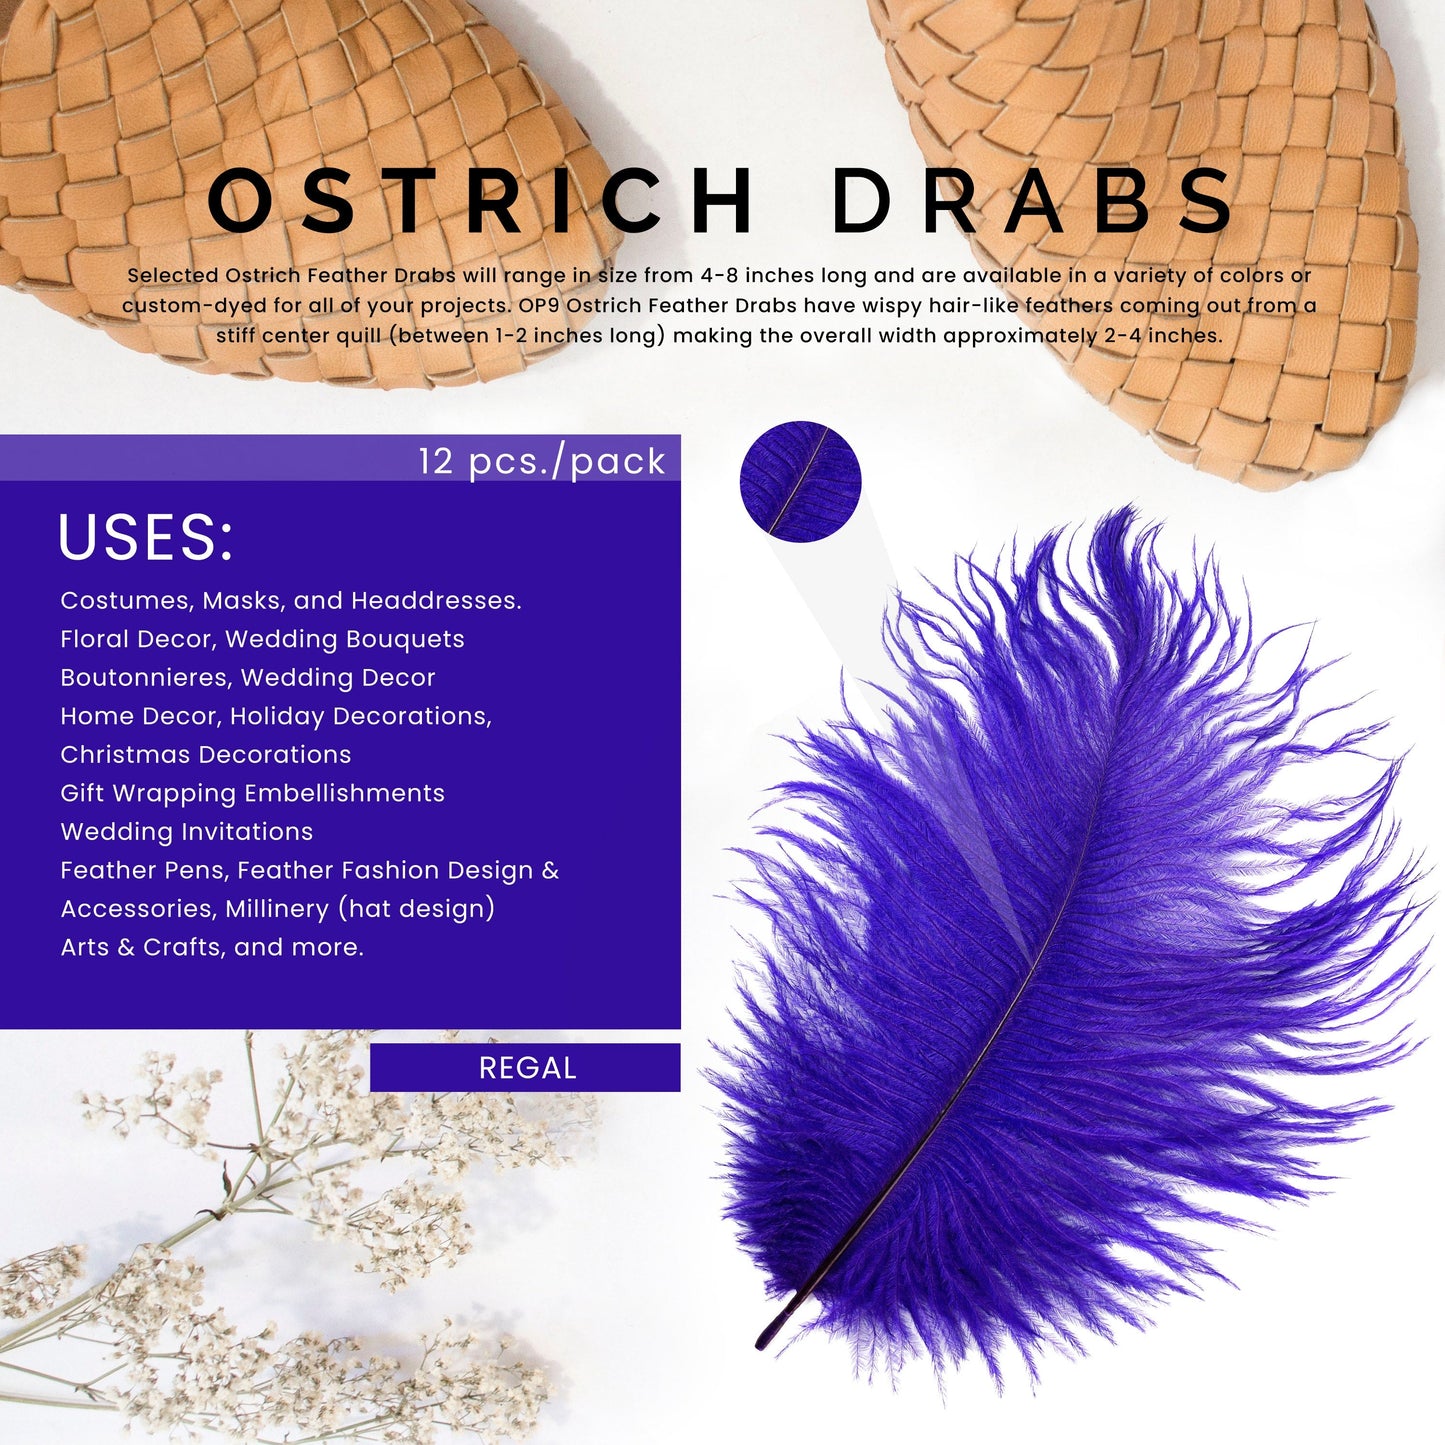 PURPLE - BULK - 4-8 inches - Ostrich Feathers Drabs - Wholesale Feathers